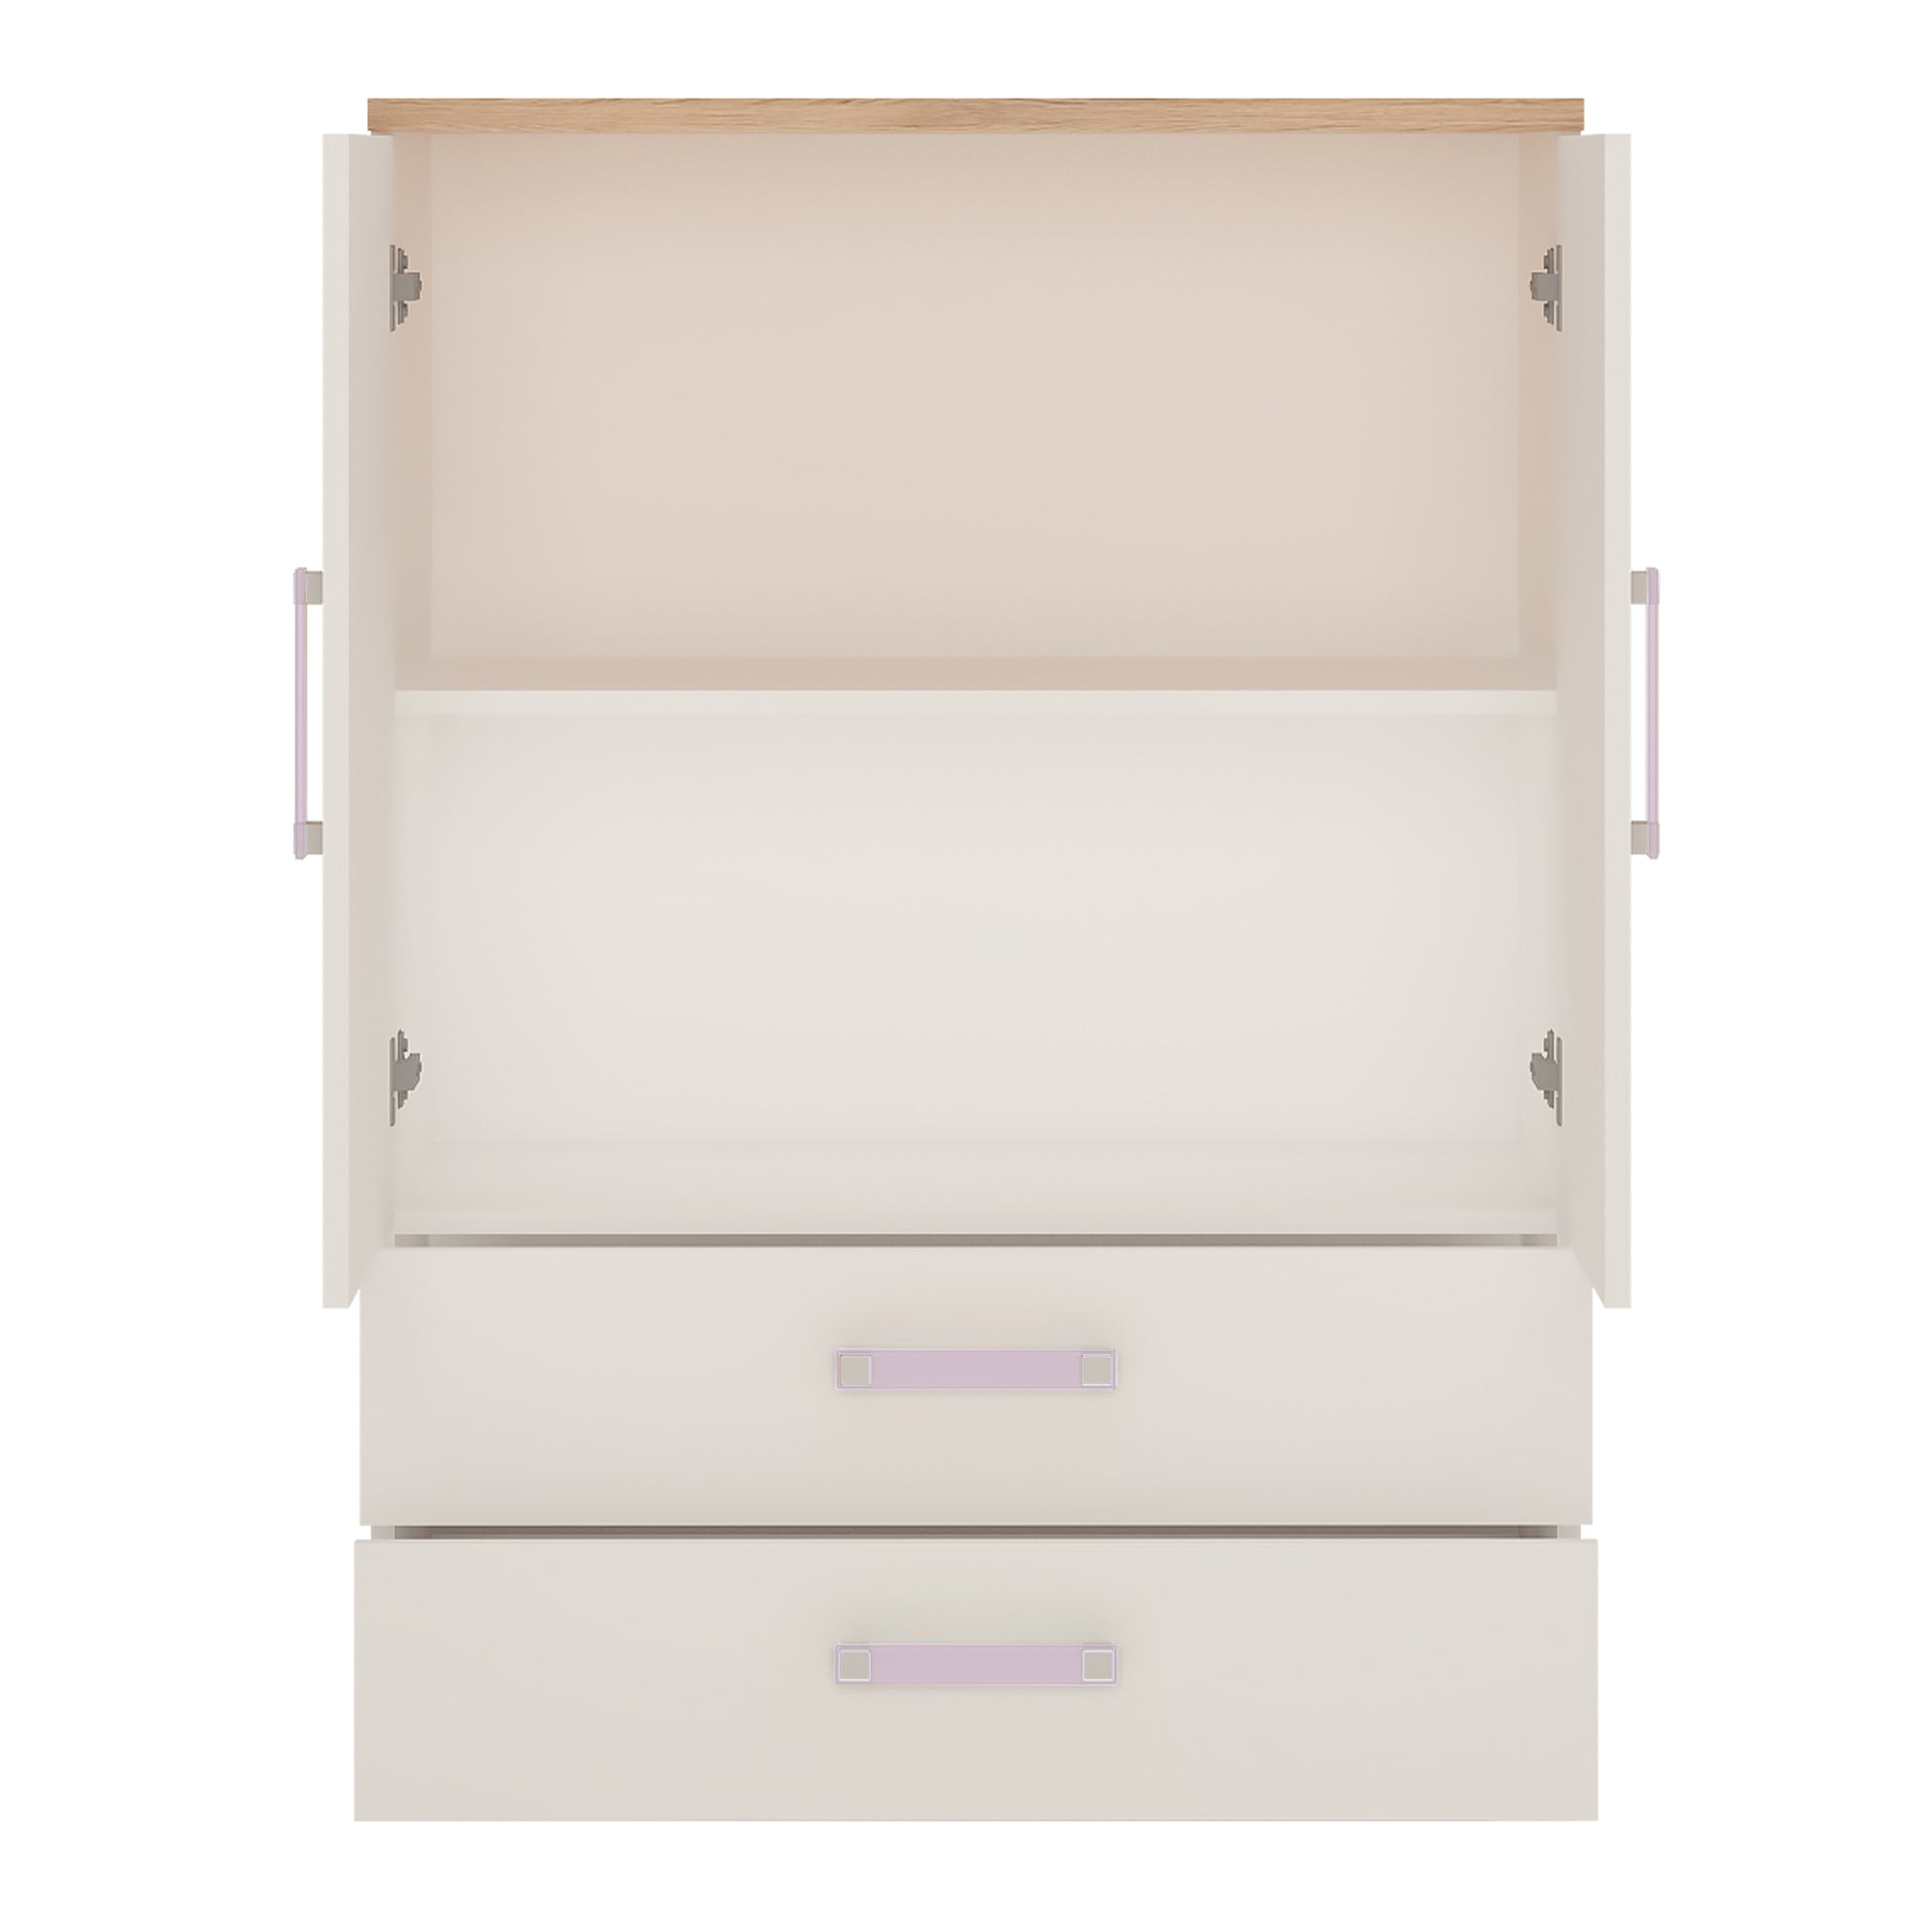 4Kids  2 Door 2 Drawer Cabinet in Light Oak and white High Gloss (lilac handles)